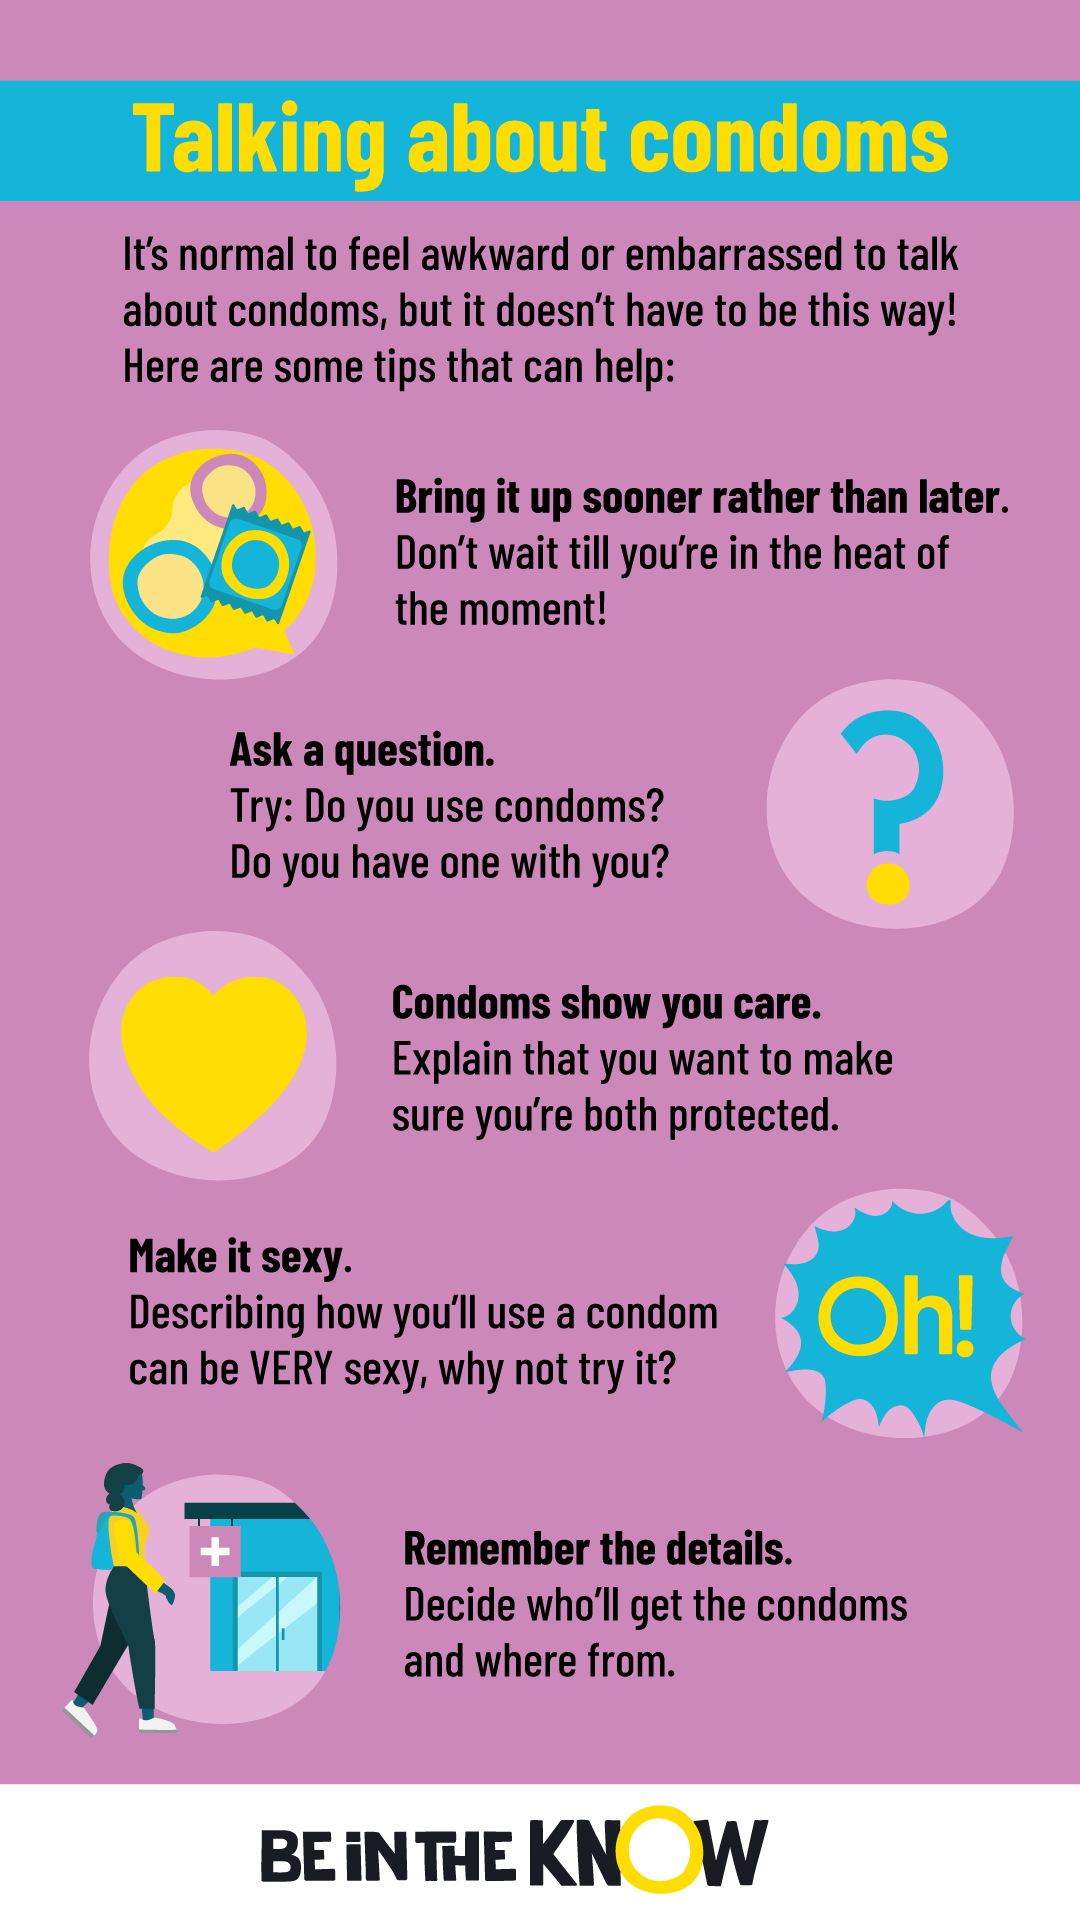 The infographic has tips to help you talk about condoms with a partner. These are: 1. Bring it up sooner rather than later – don’t wait till you are in the heat of the moment! 2. Start with a question – try: Do you use condoms? Do you have one with you? 3. Condoms show you care – you can explain that you want to make sure you’re both protected. 4. Make it sexy – describing how you’ll use a condom can be VERY sexy, why not try it? 5. Remember the details ,decide who’ll get the condoms and where